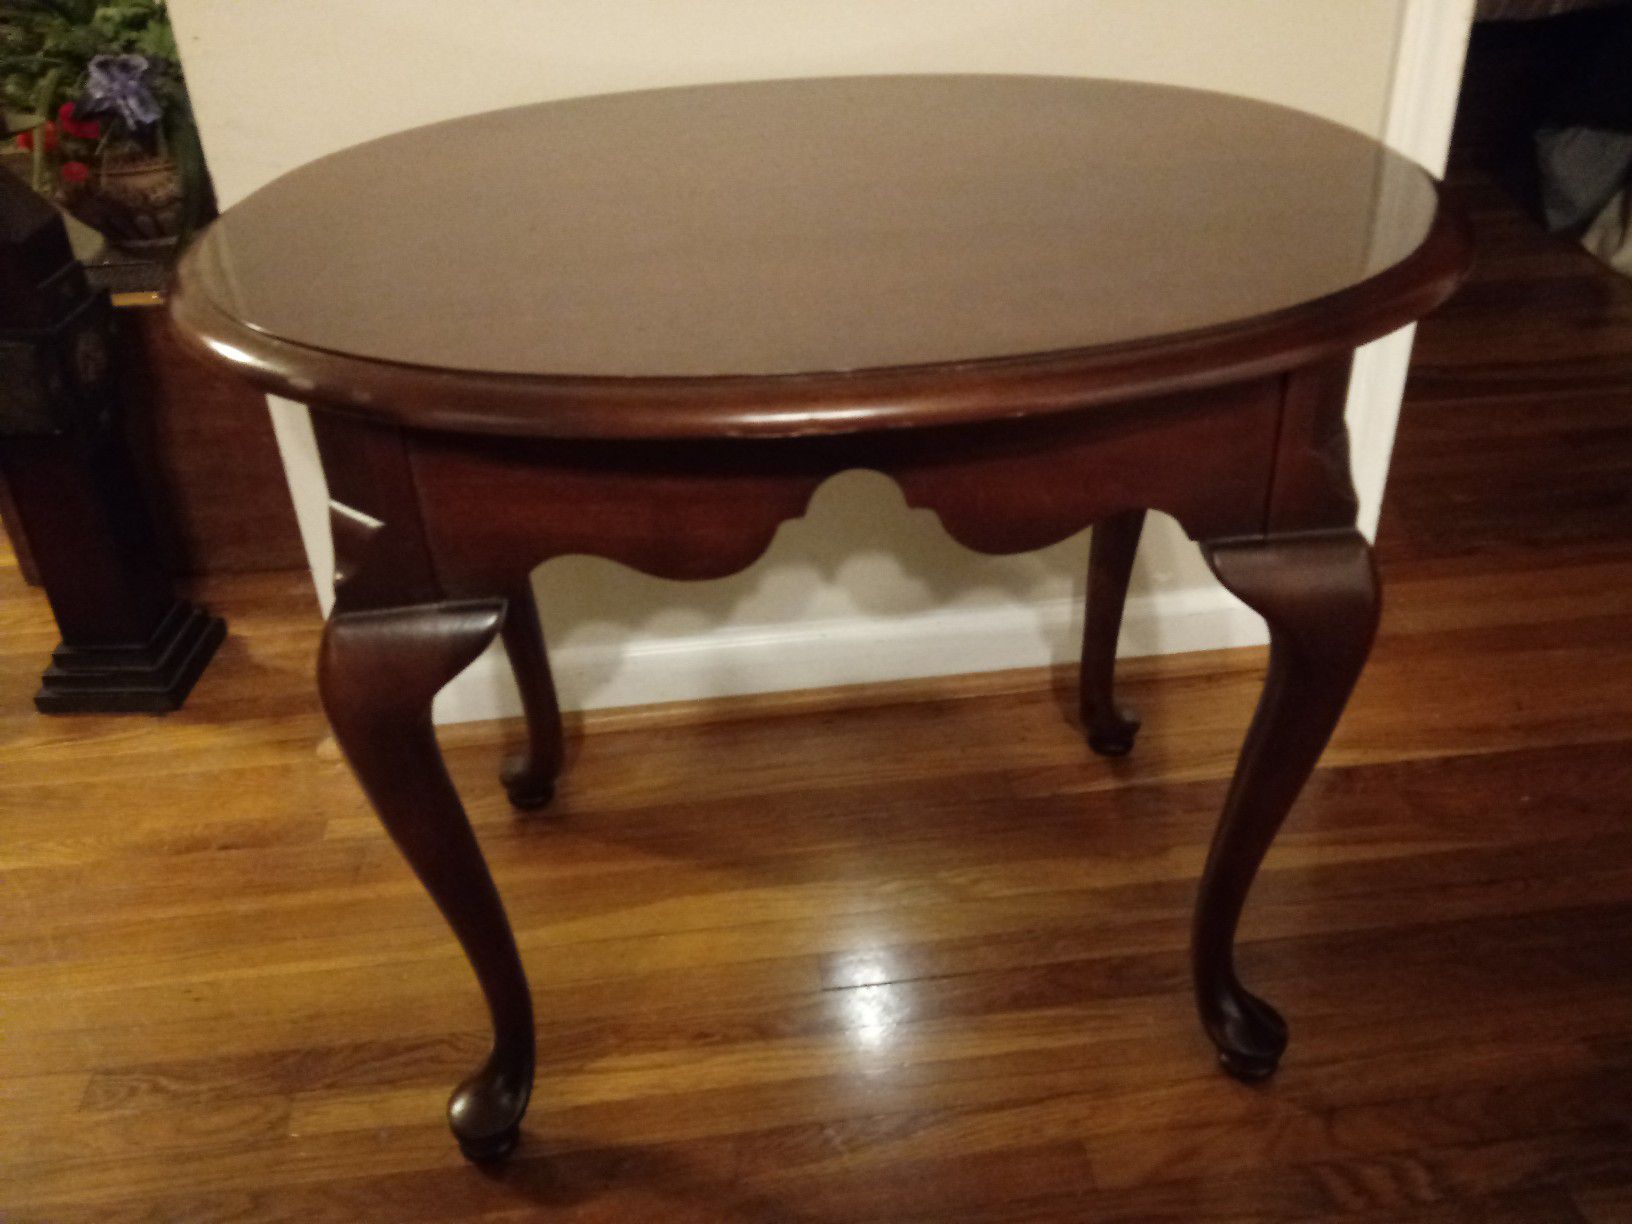 Bassett solid cherry table with slide out